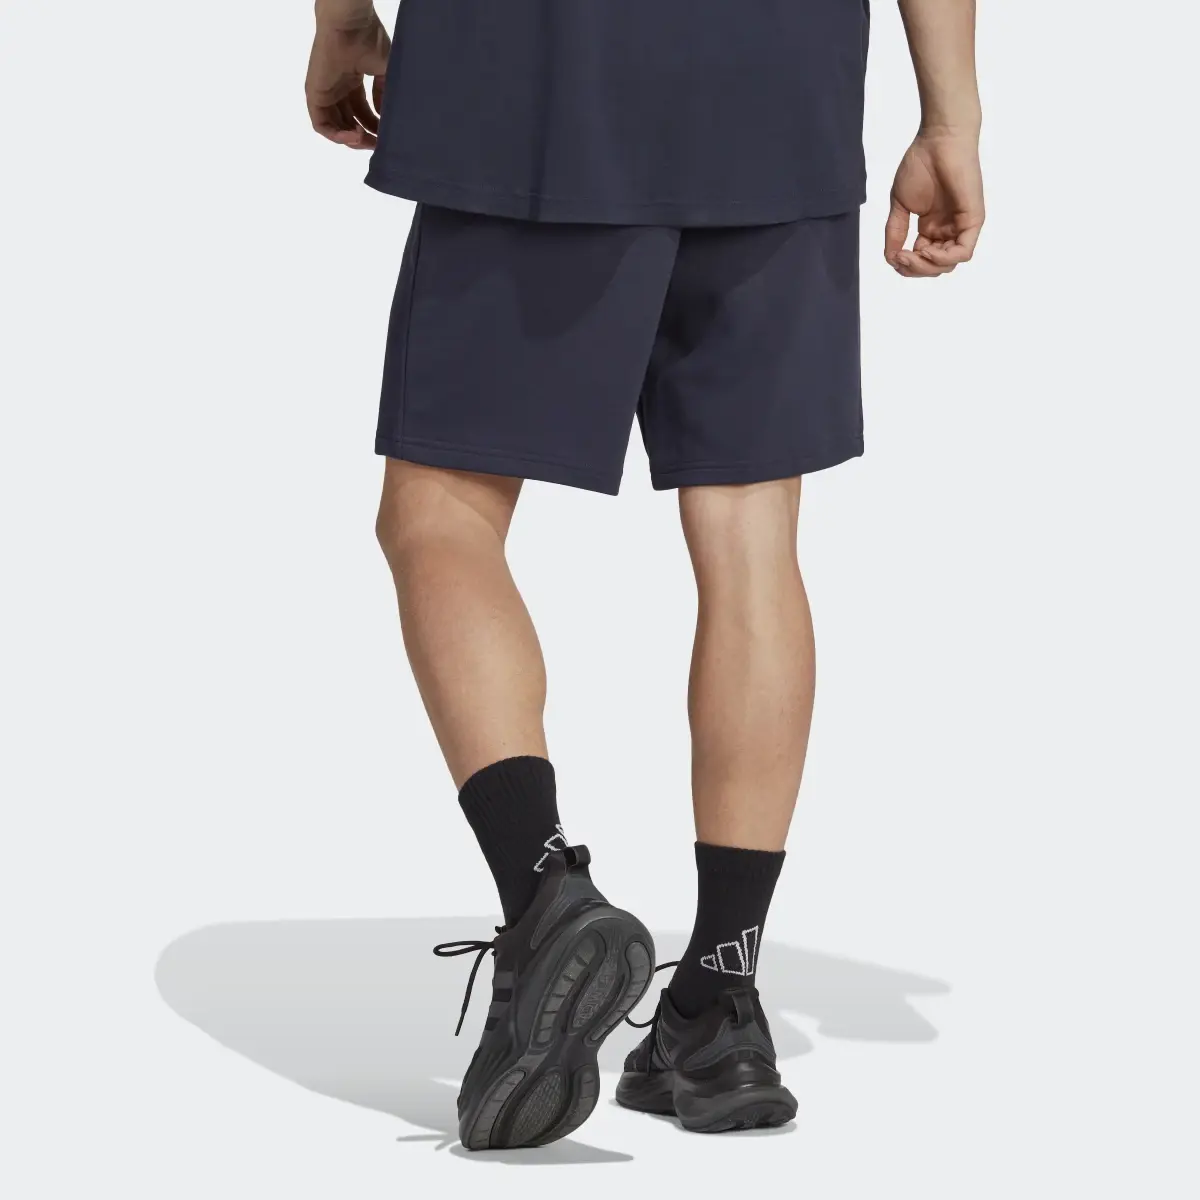 Adidas ALL SZN French Terry Shorts. 2